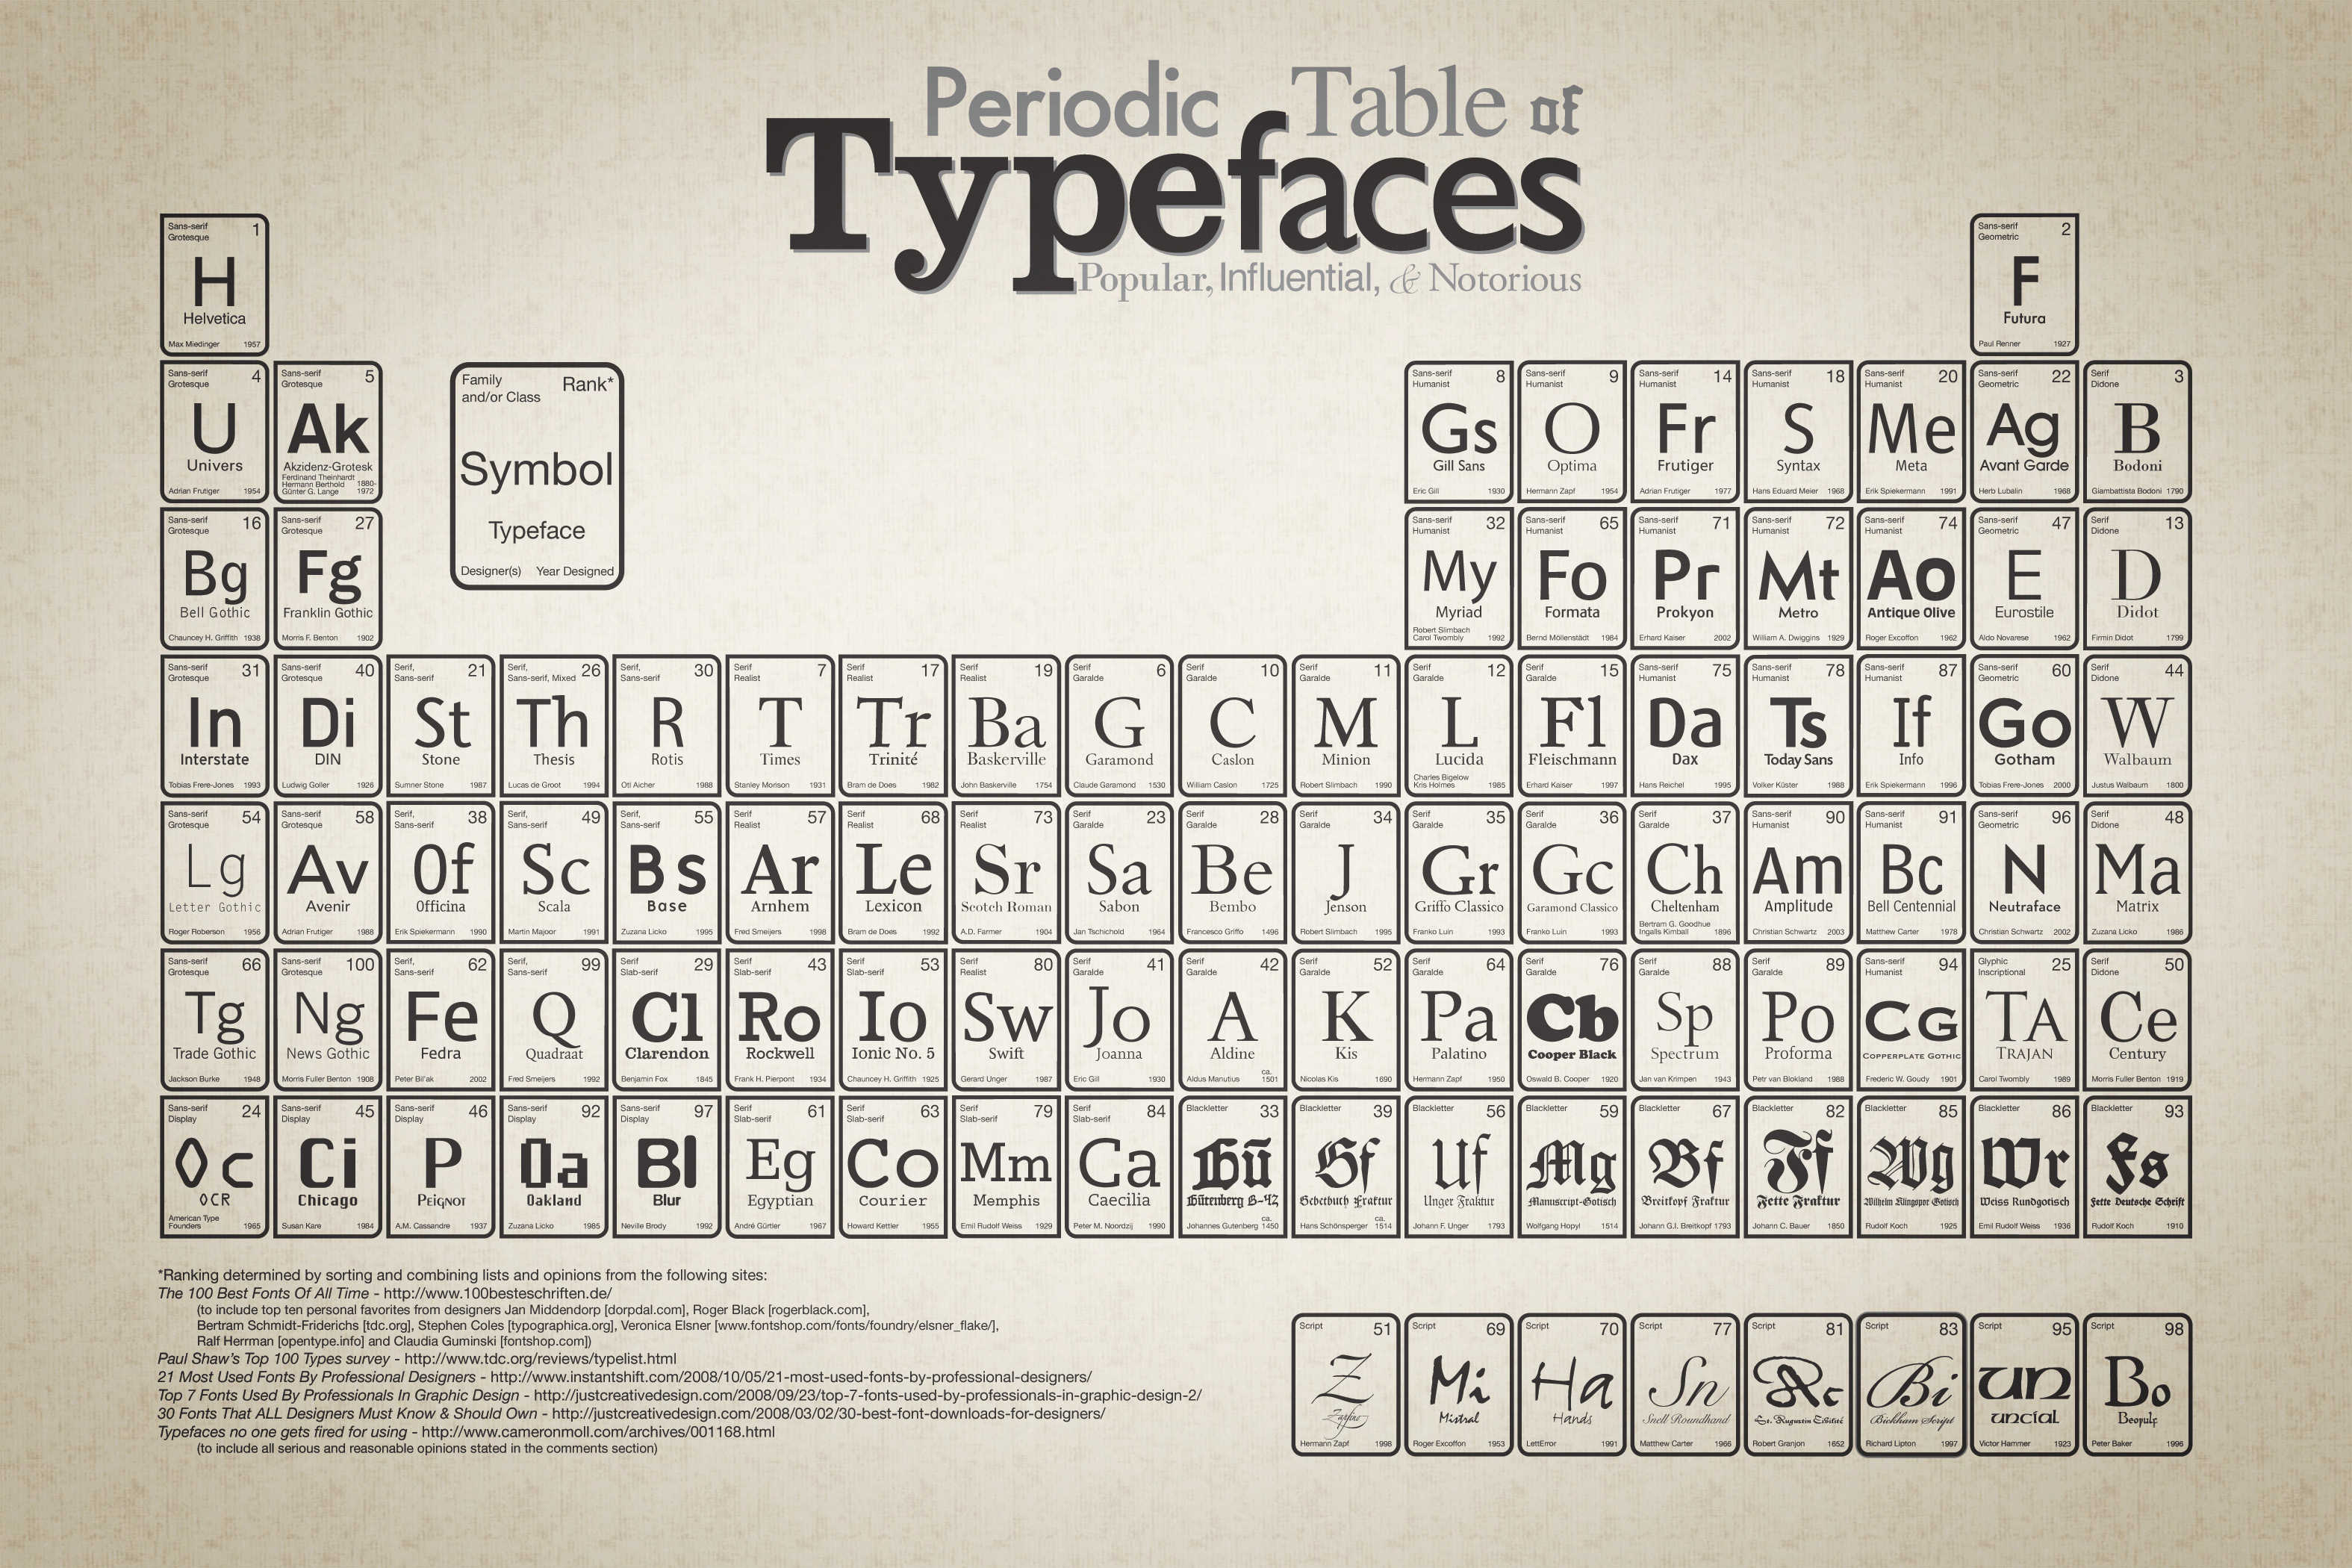 Typeface Periodic Table | The Floating Frog